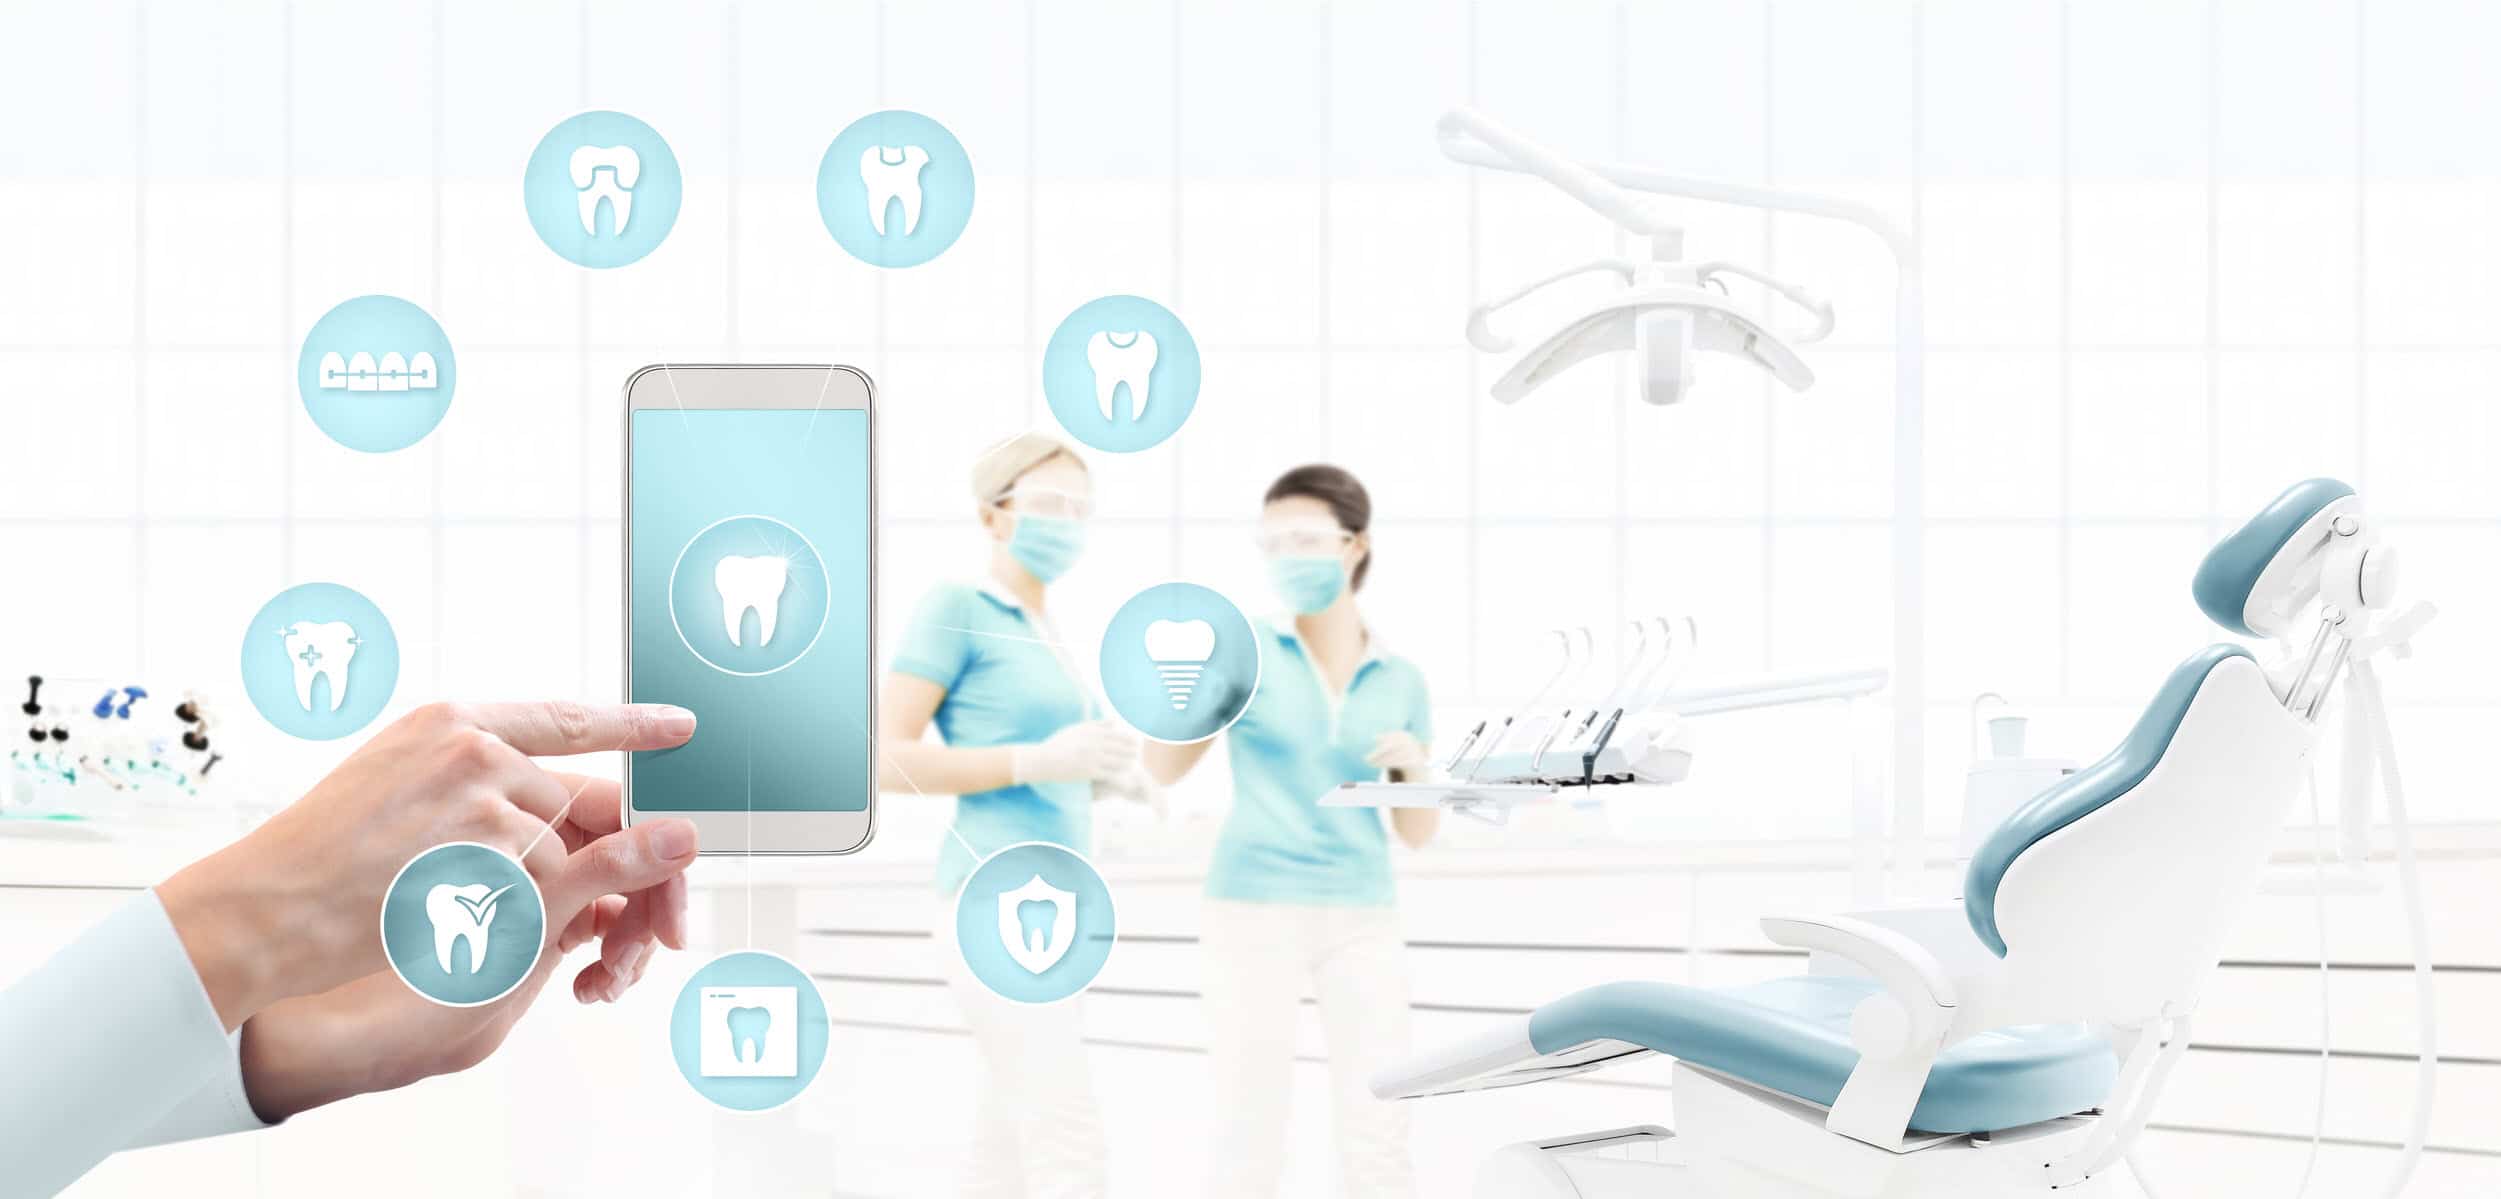 10 Dental Marketing Ideas Proven to Attract New Patients